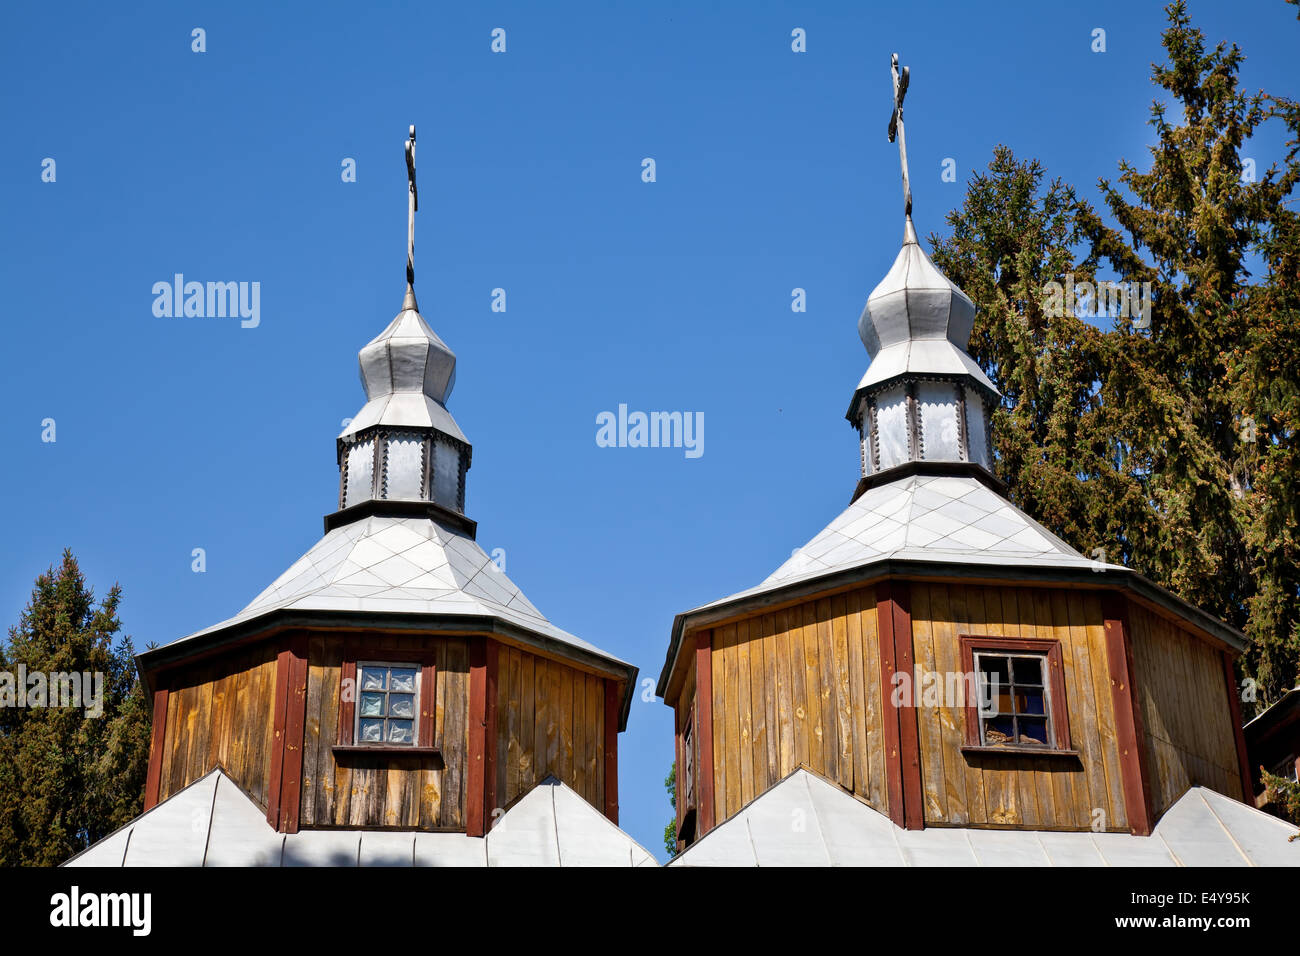 Wooden church two domes Stock Photo